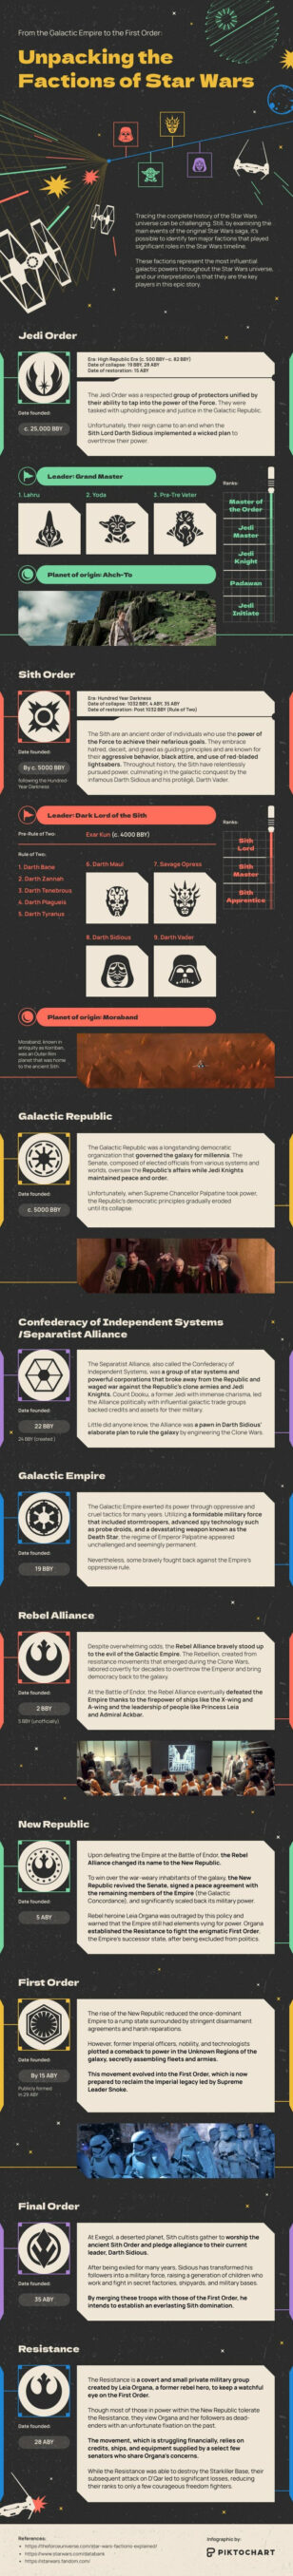 Unpacking the Factions of Star Wars